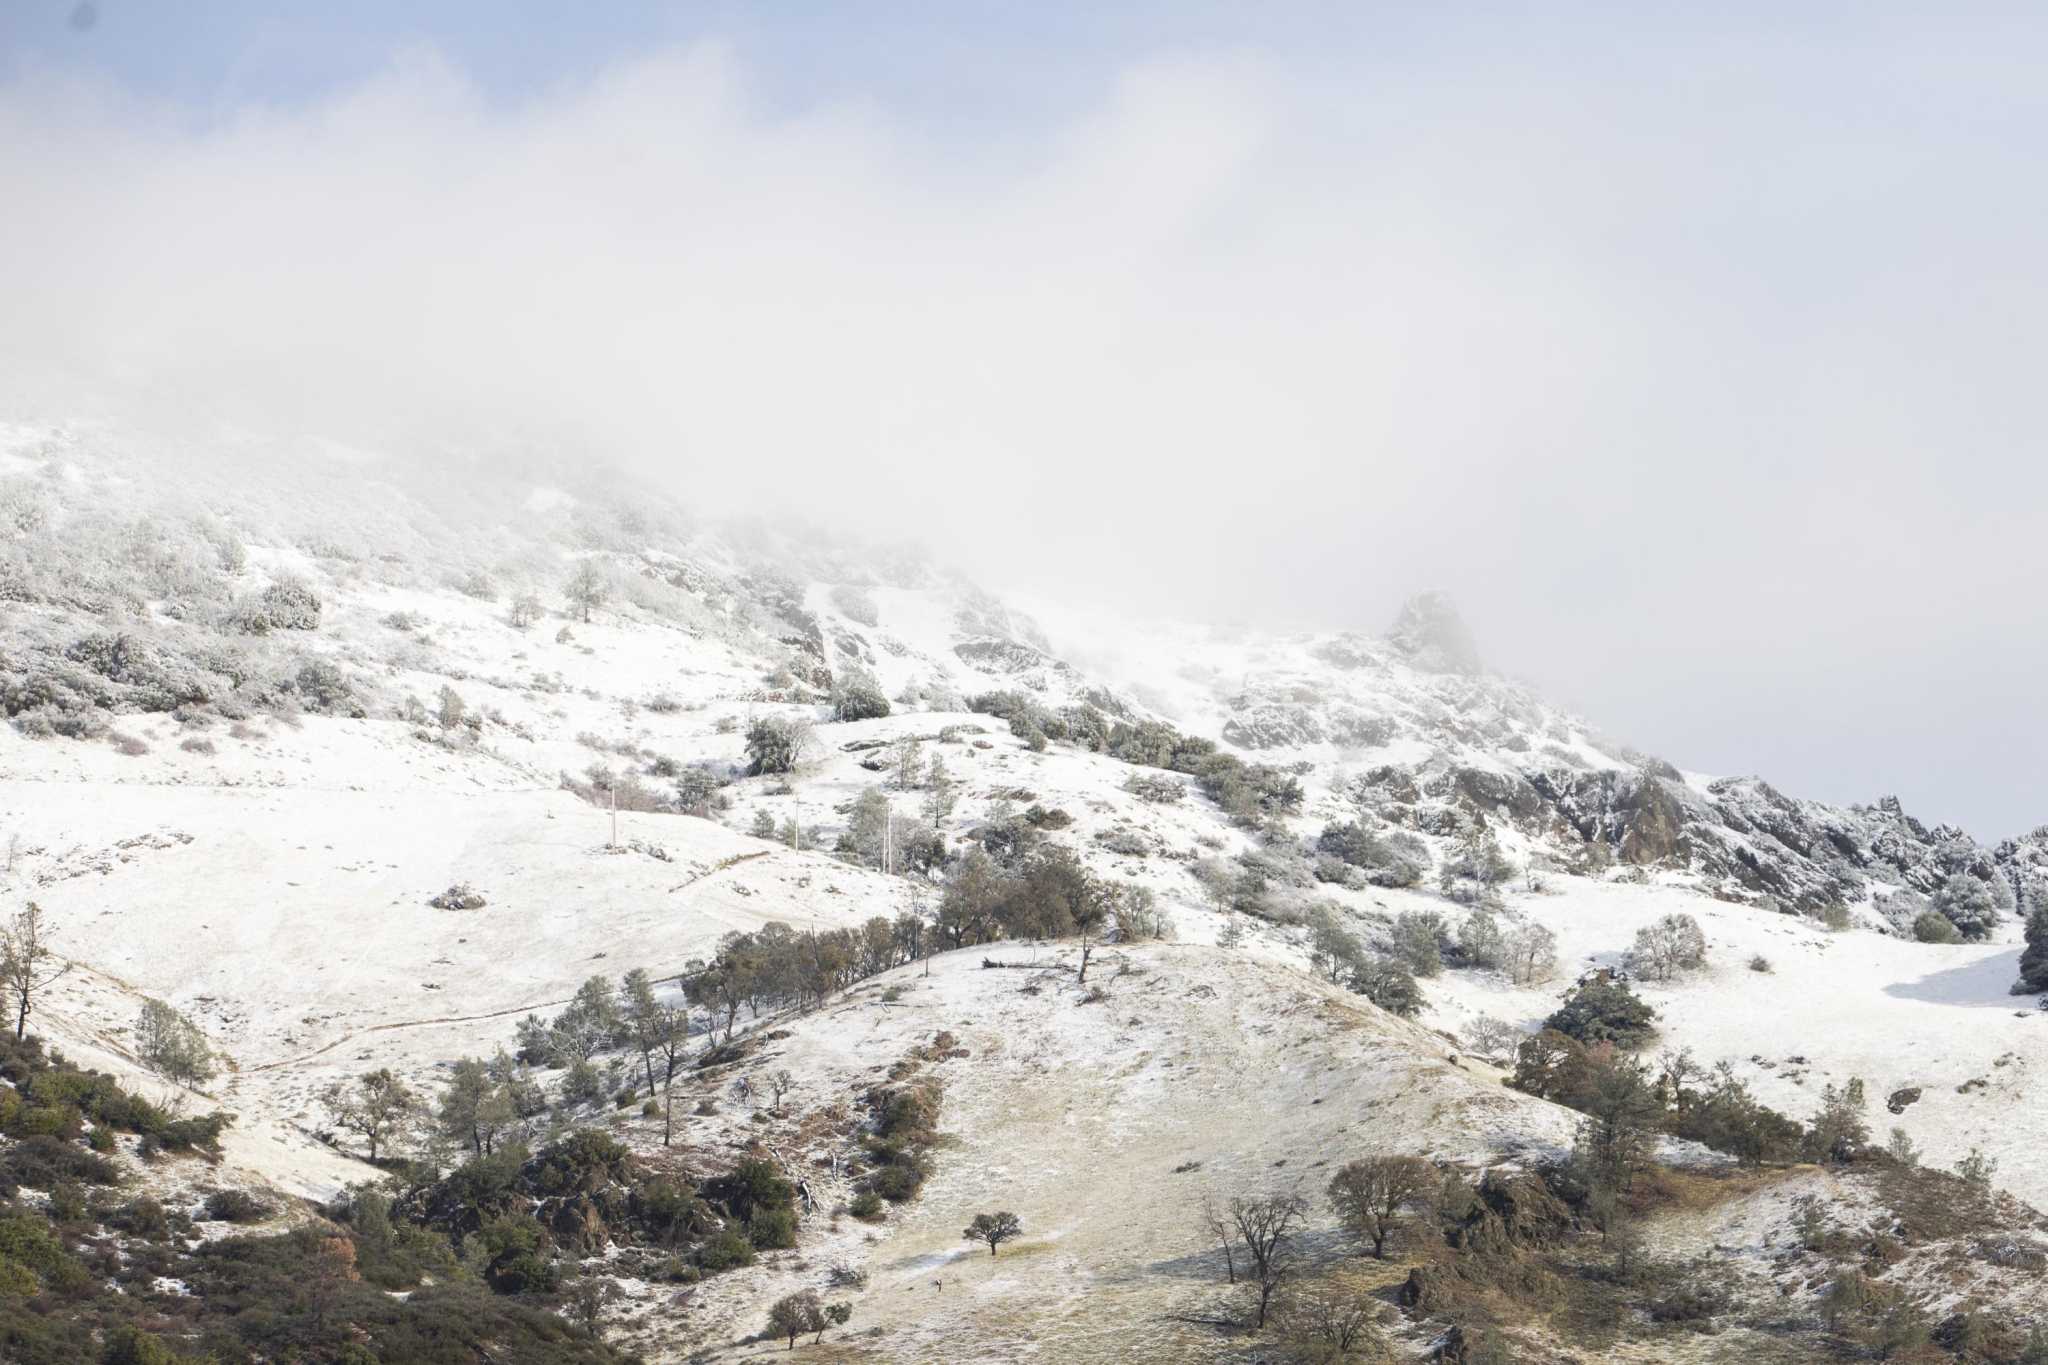 These photos of snow-covered Mount Diablo are like a winter wonderland.